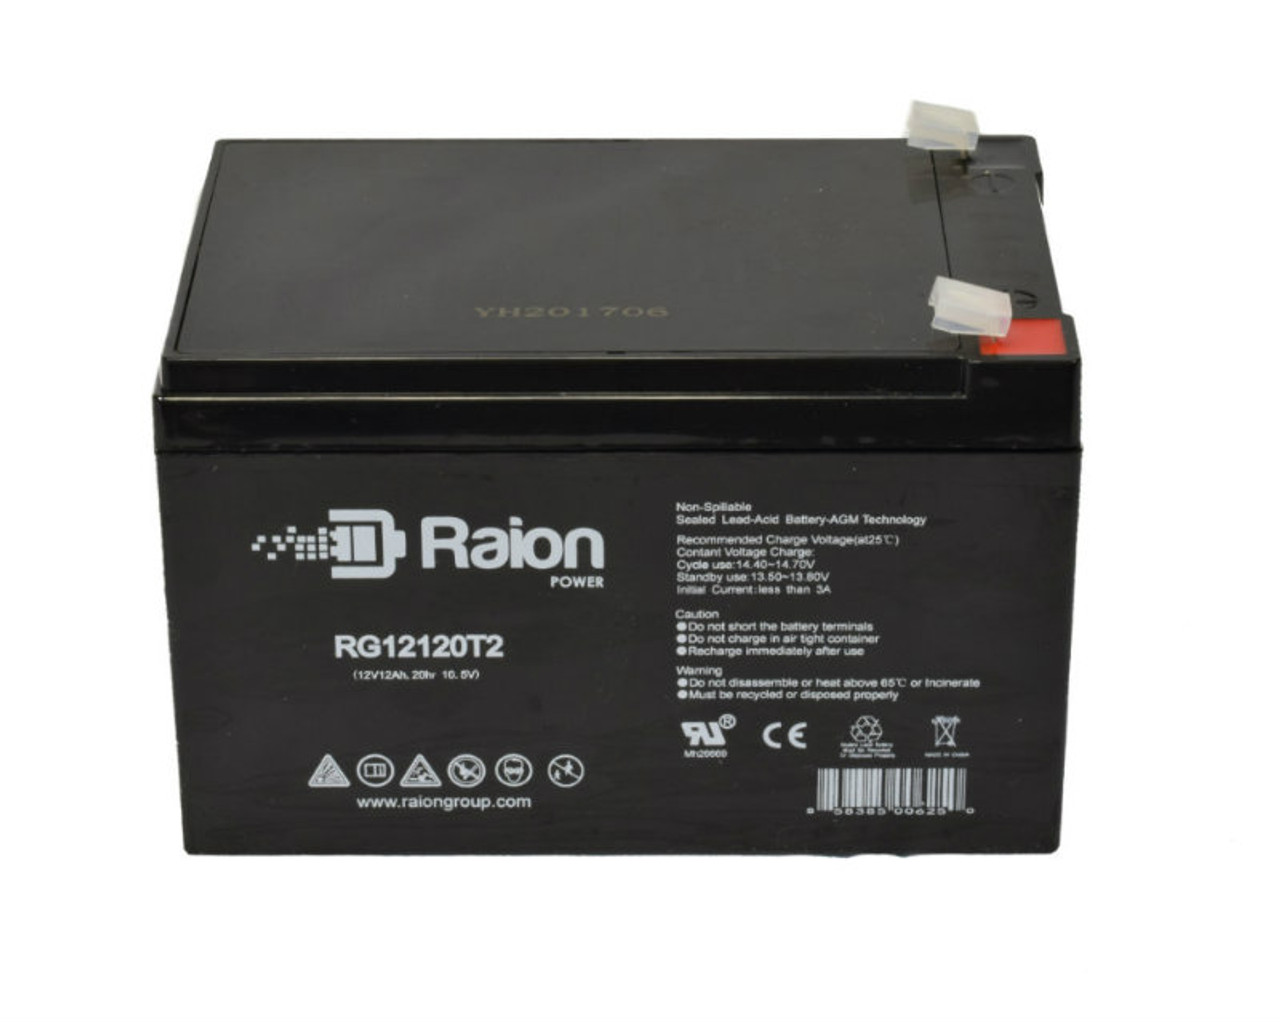 Raion Power RG12120T2 SLA Battery for Frank Mobility E-Fix with High Capacity Case Wheelchairs